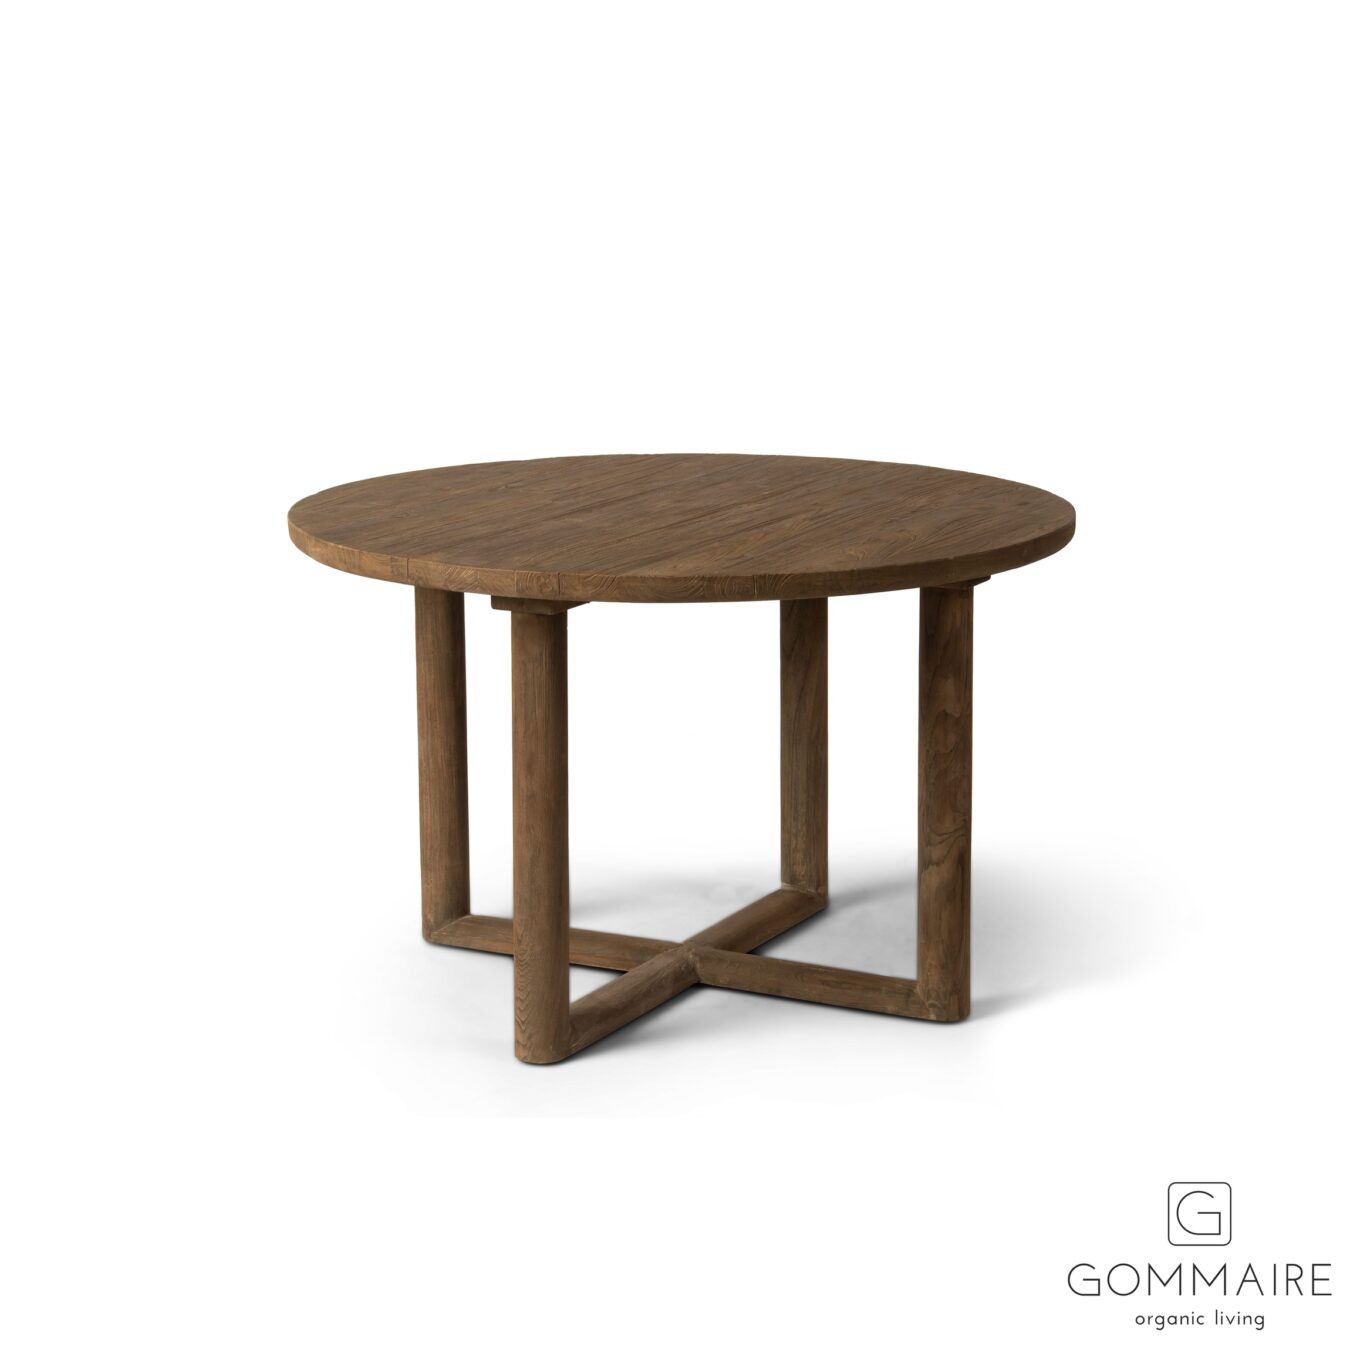 Koop JUSTIN TABLE by GOMMAIRE